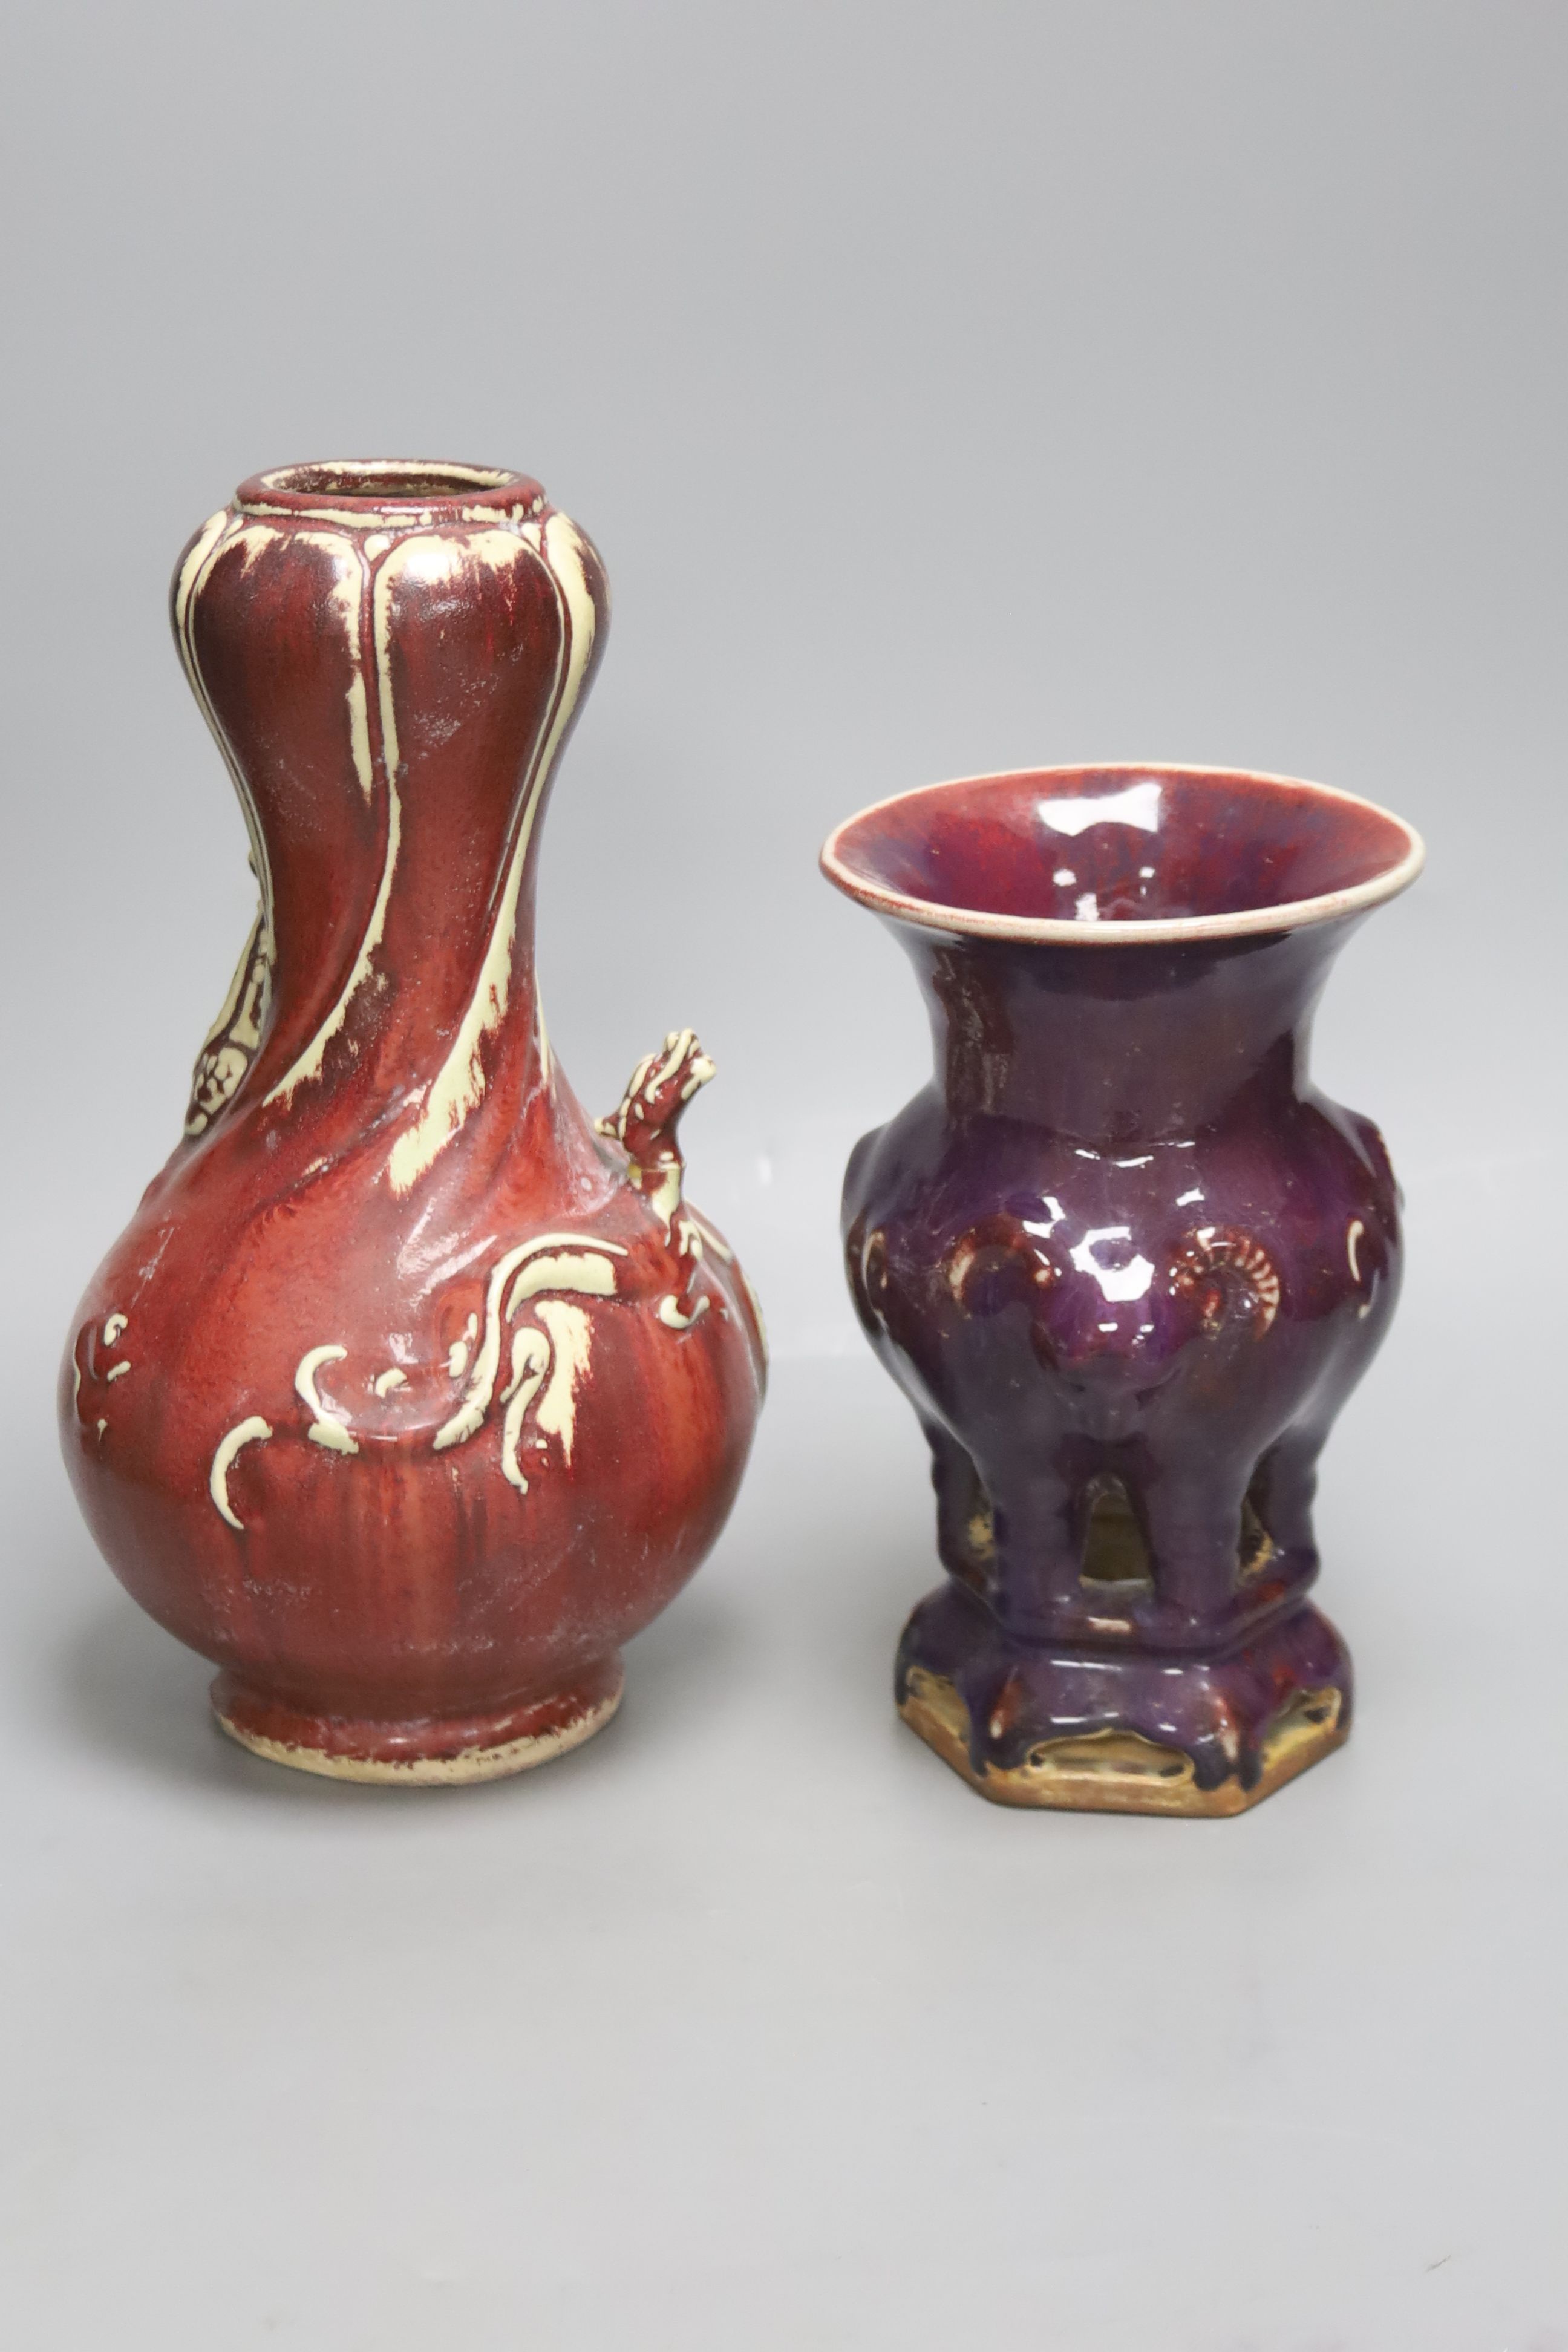 A Chinese Jun type vase and a Sang de boeuf vase, tallest 29cm